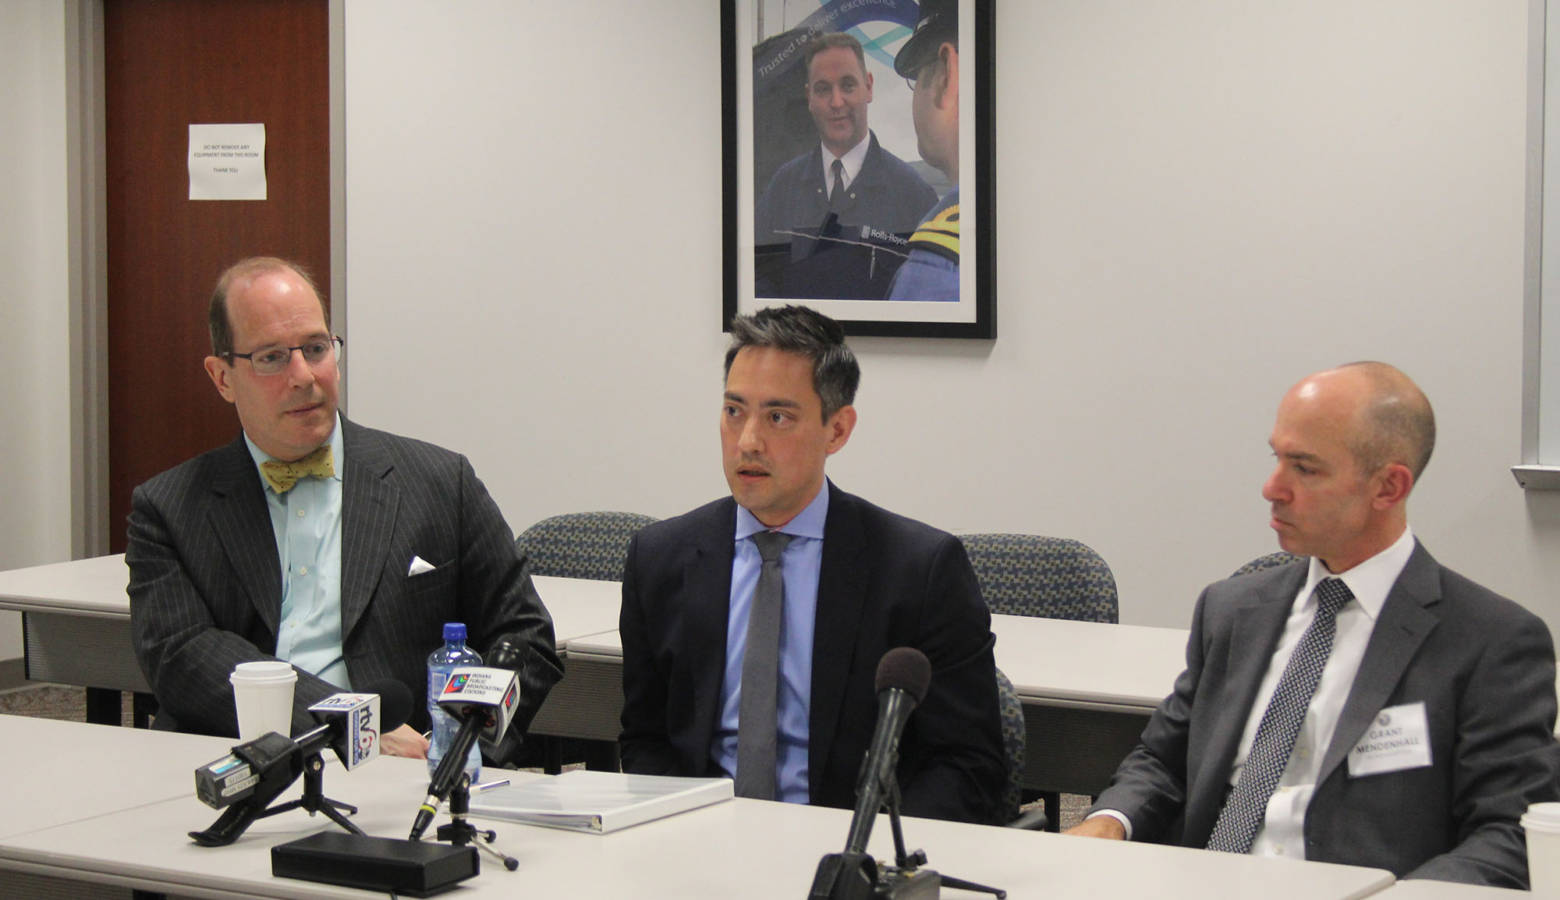 Assistant Secretary of State Dr. Chris Ford, Department of Commerce Special Agent Dan Clutch, and FBI Special Agent Grant Mendenhall answer media questions on economic espionage. (Samantha Horton/IPB News)